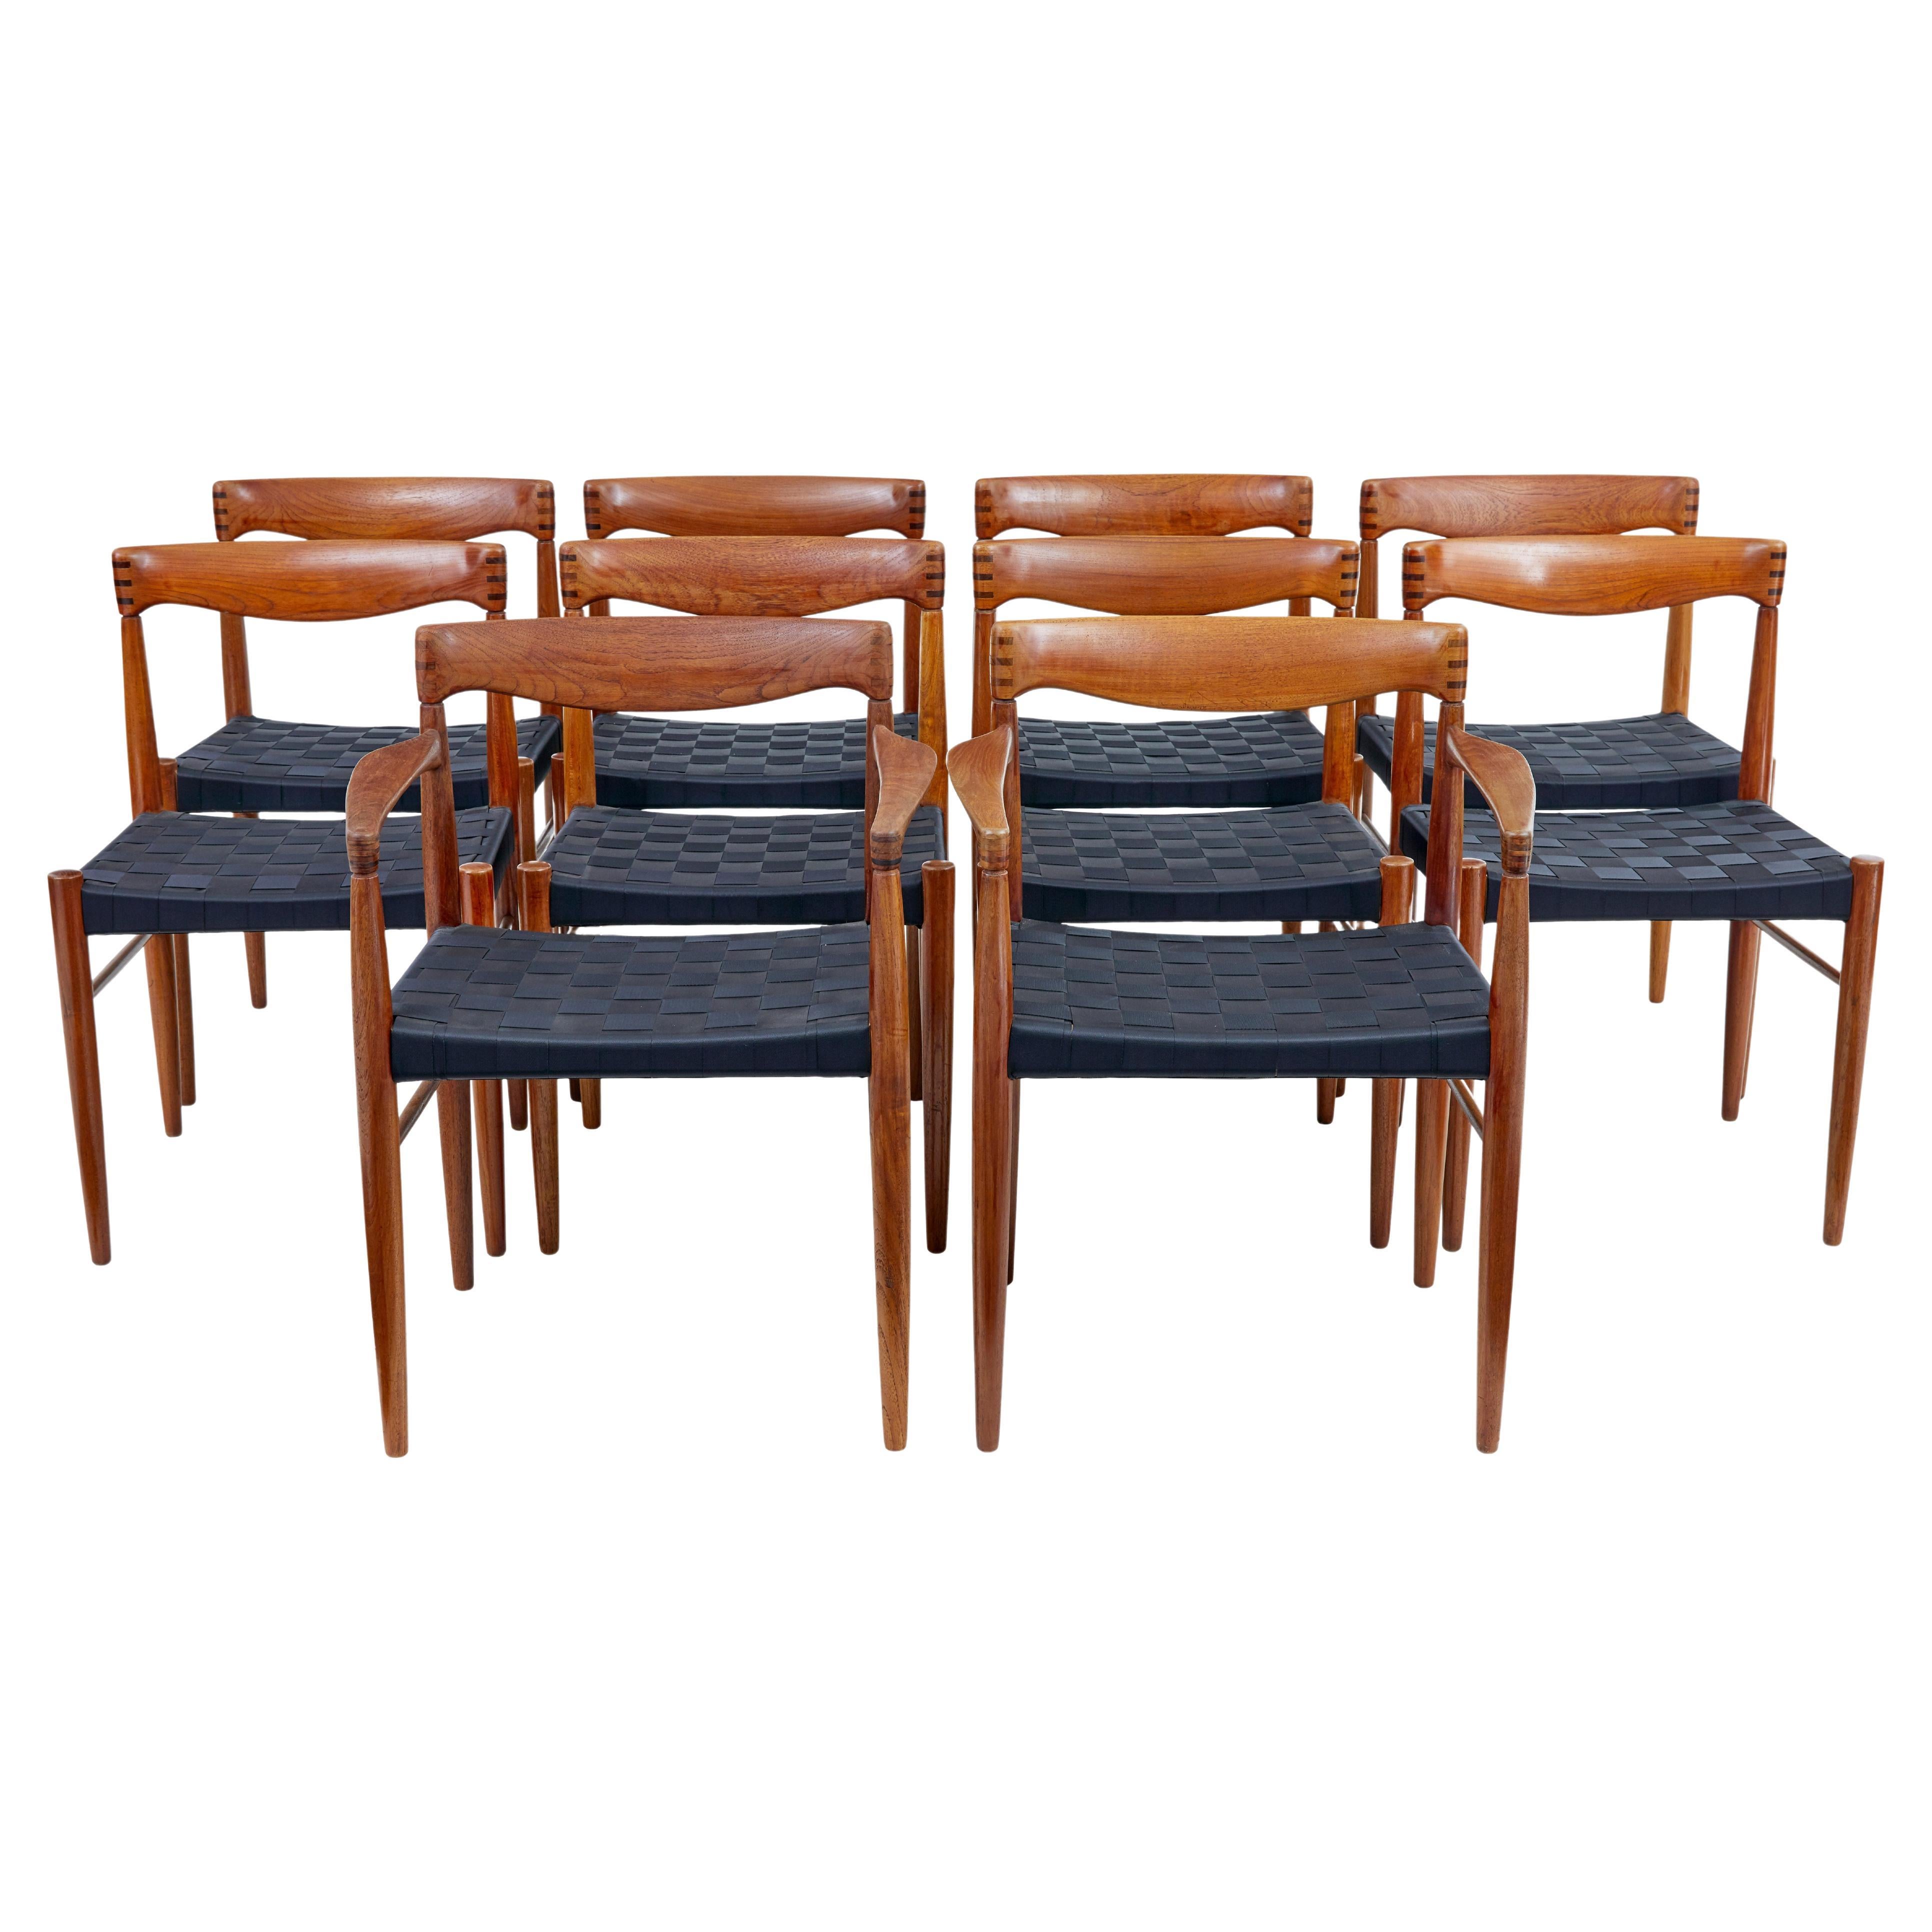 Set of 10 mid century teak dining chairs by Bramin